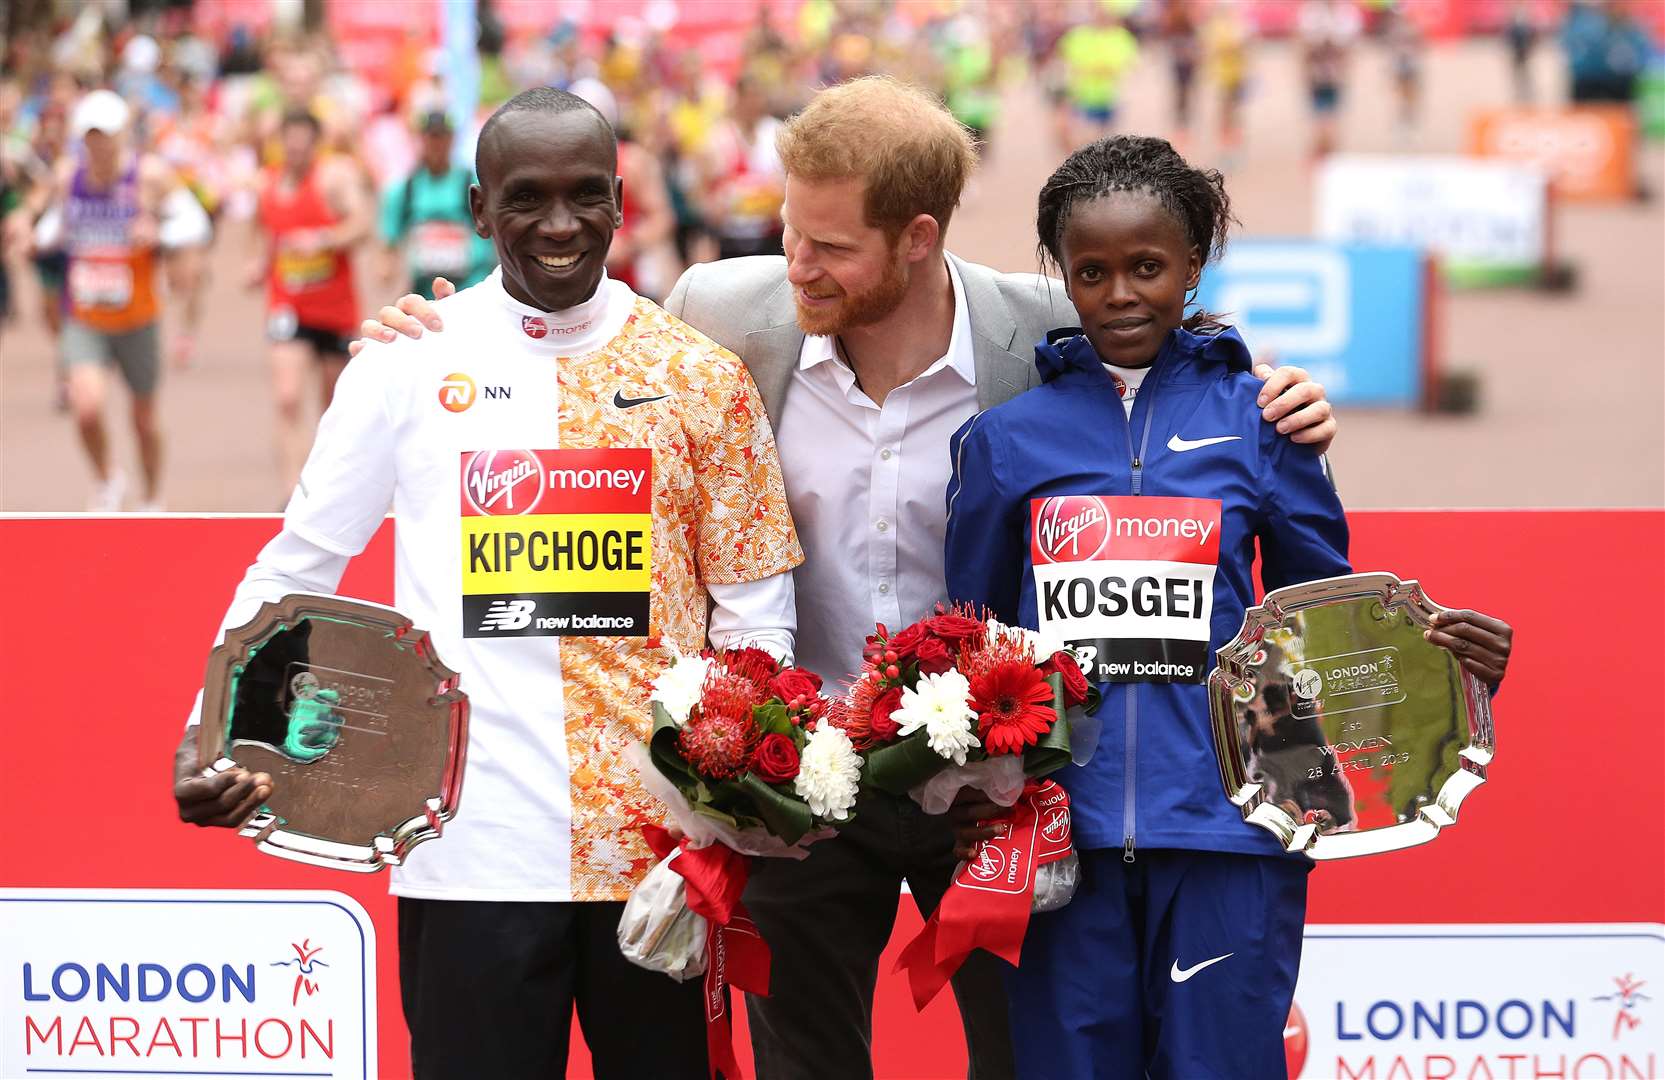 The Duke of Sussex poses with the winner of the men’s marathon Kenya’s Eliud Kipchoge and women’s marathon Kenya’s Brigid Kosgei after last year’s event (Paul Harding/PA)